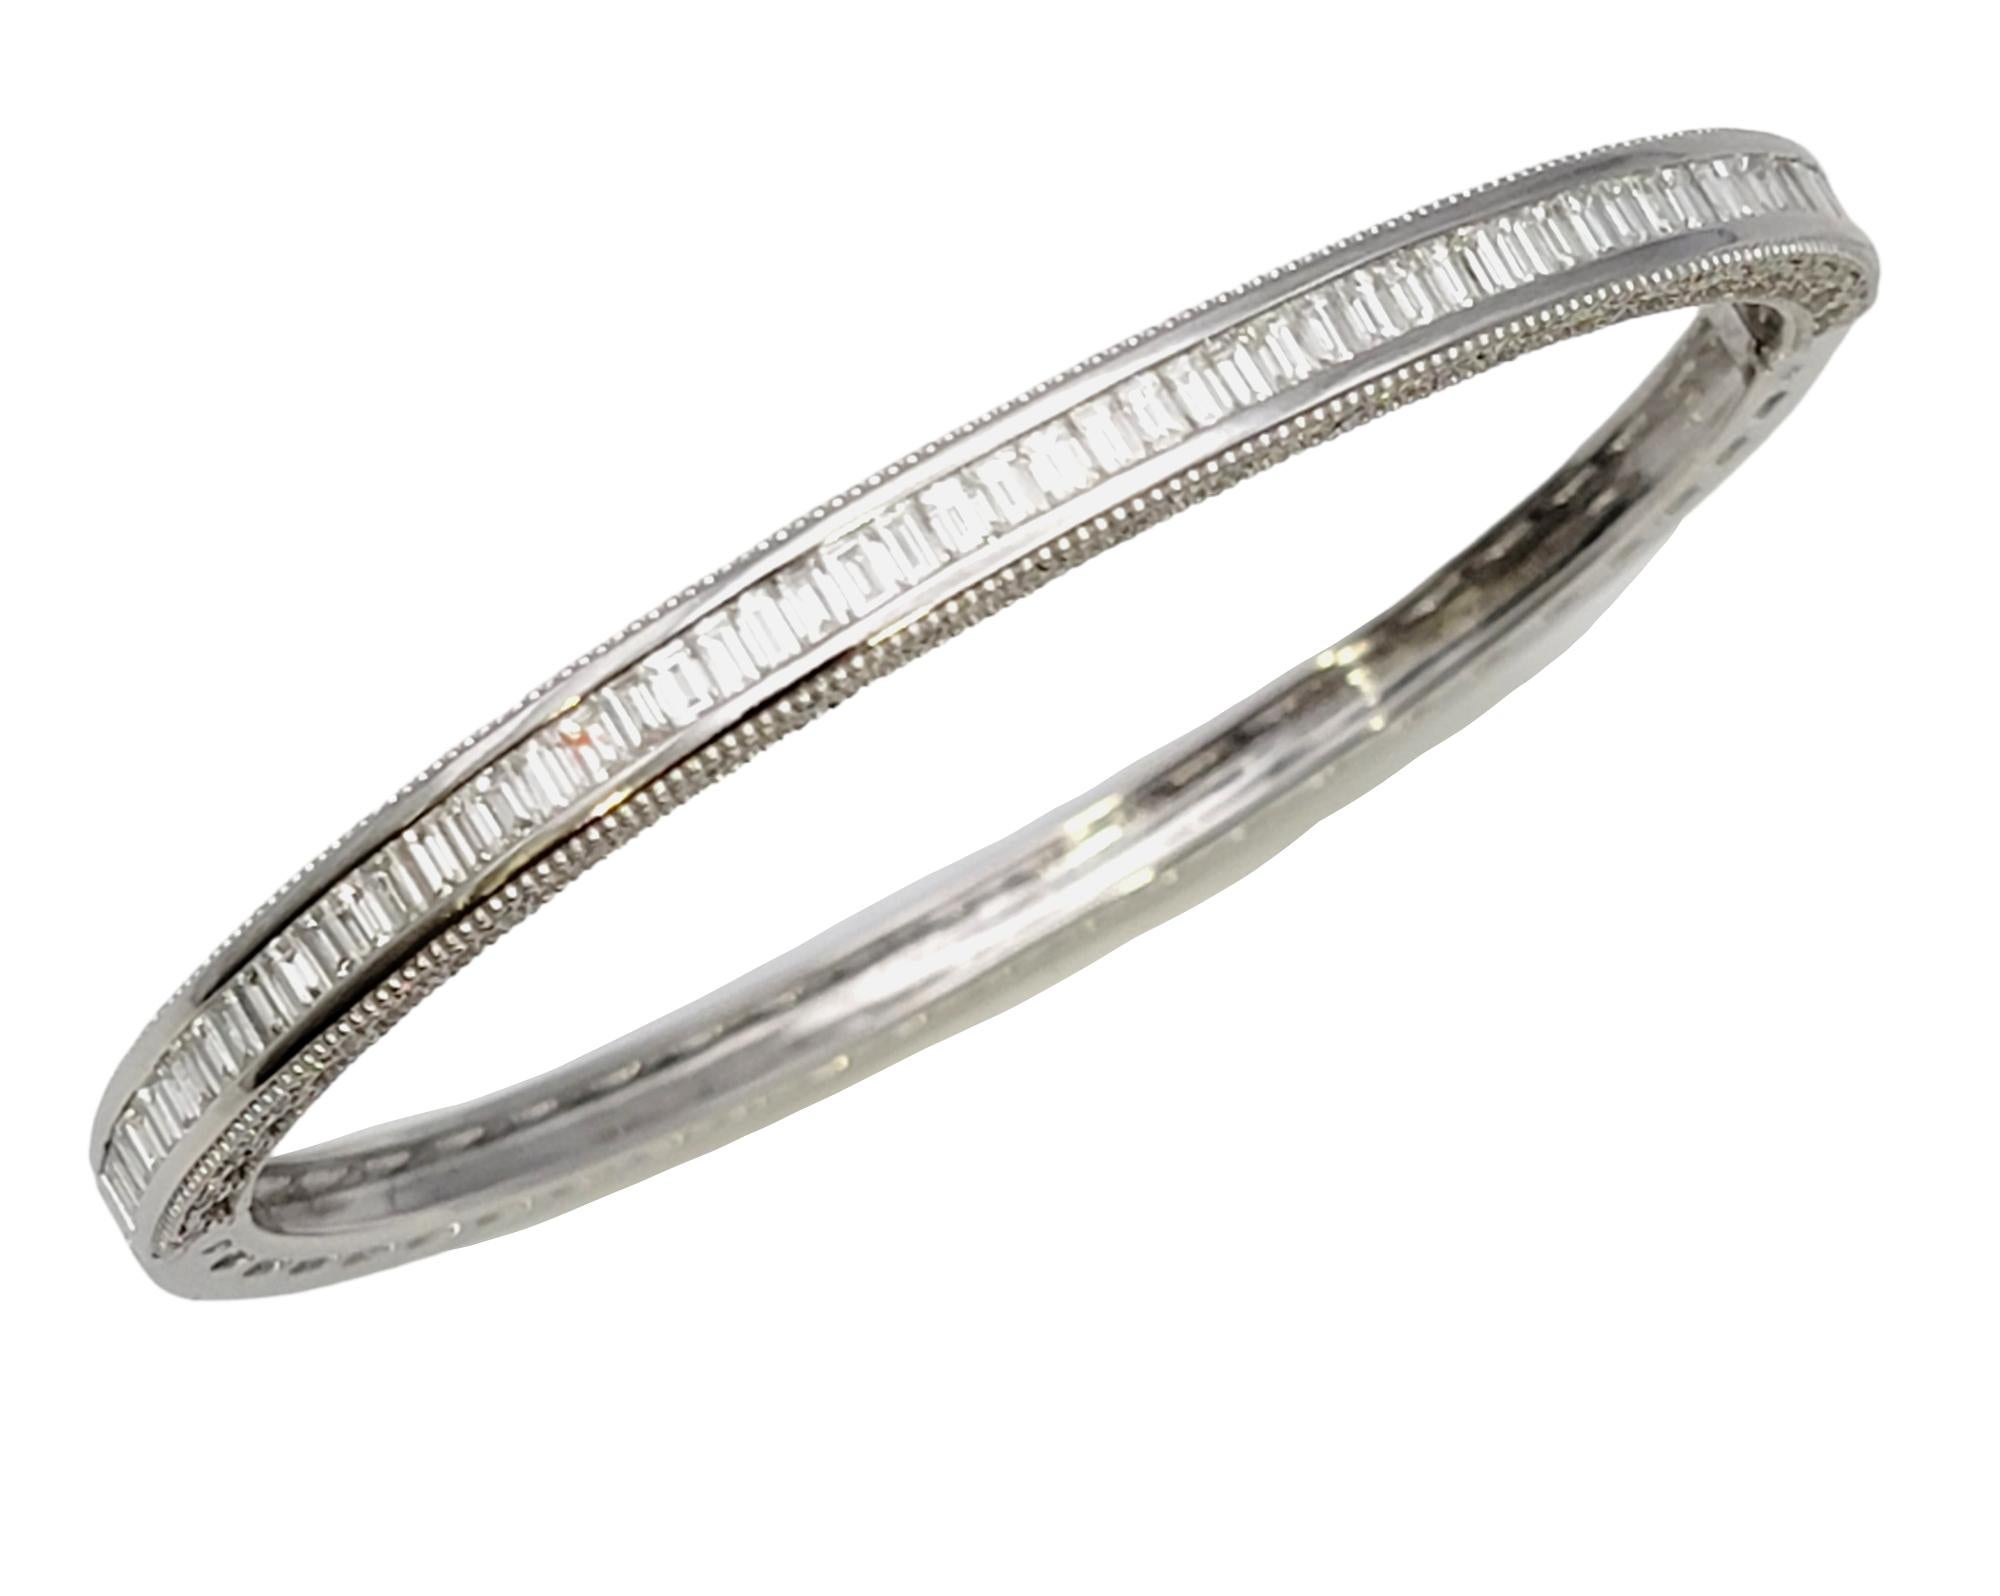 Sleek and sparkly diamond bangle bracelet in polished 18 karat white gold. This elegant bracelet absolutely shines on the wrist, glittering from every angle. Icy white baguette diamonds are channel set along the top half of the bracelet, set very